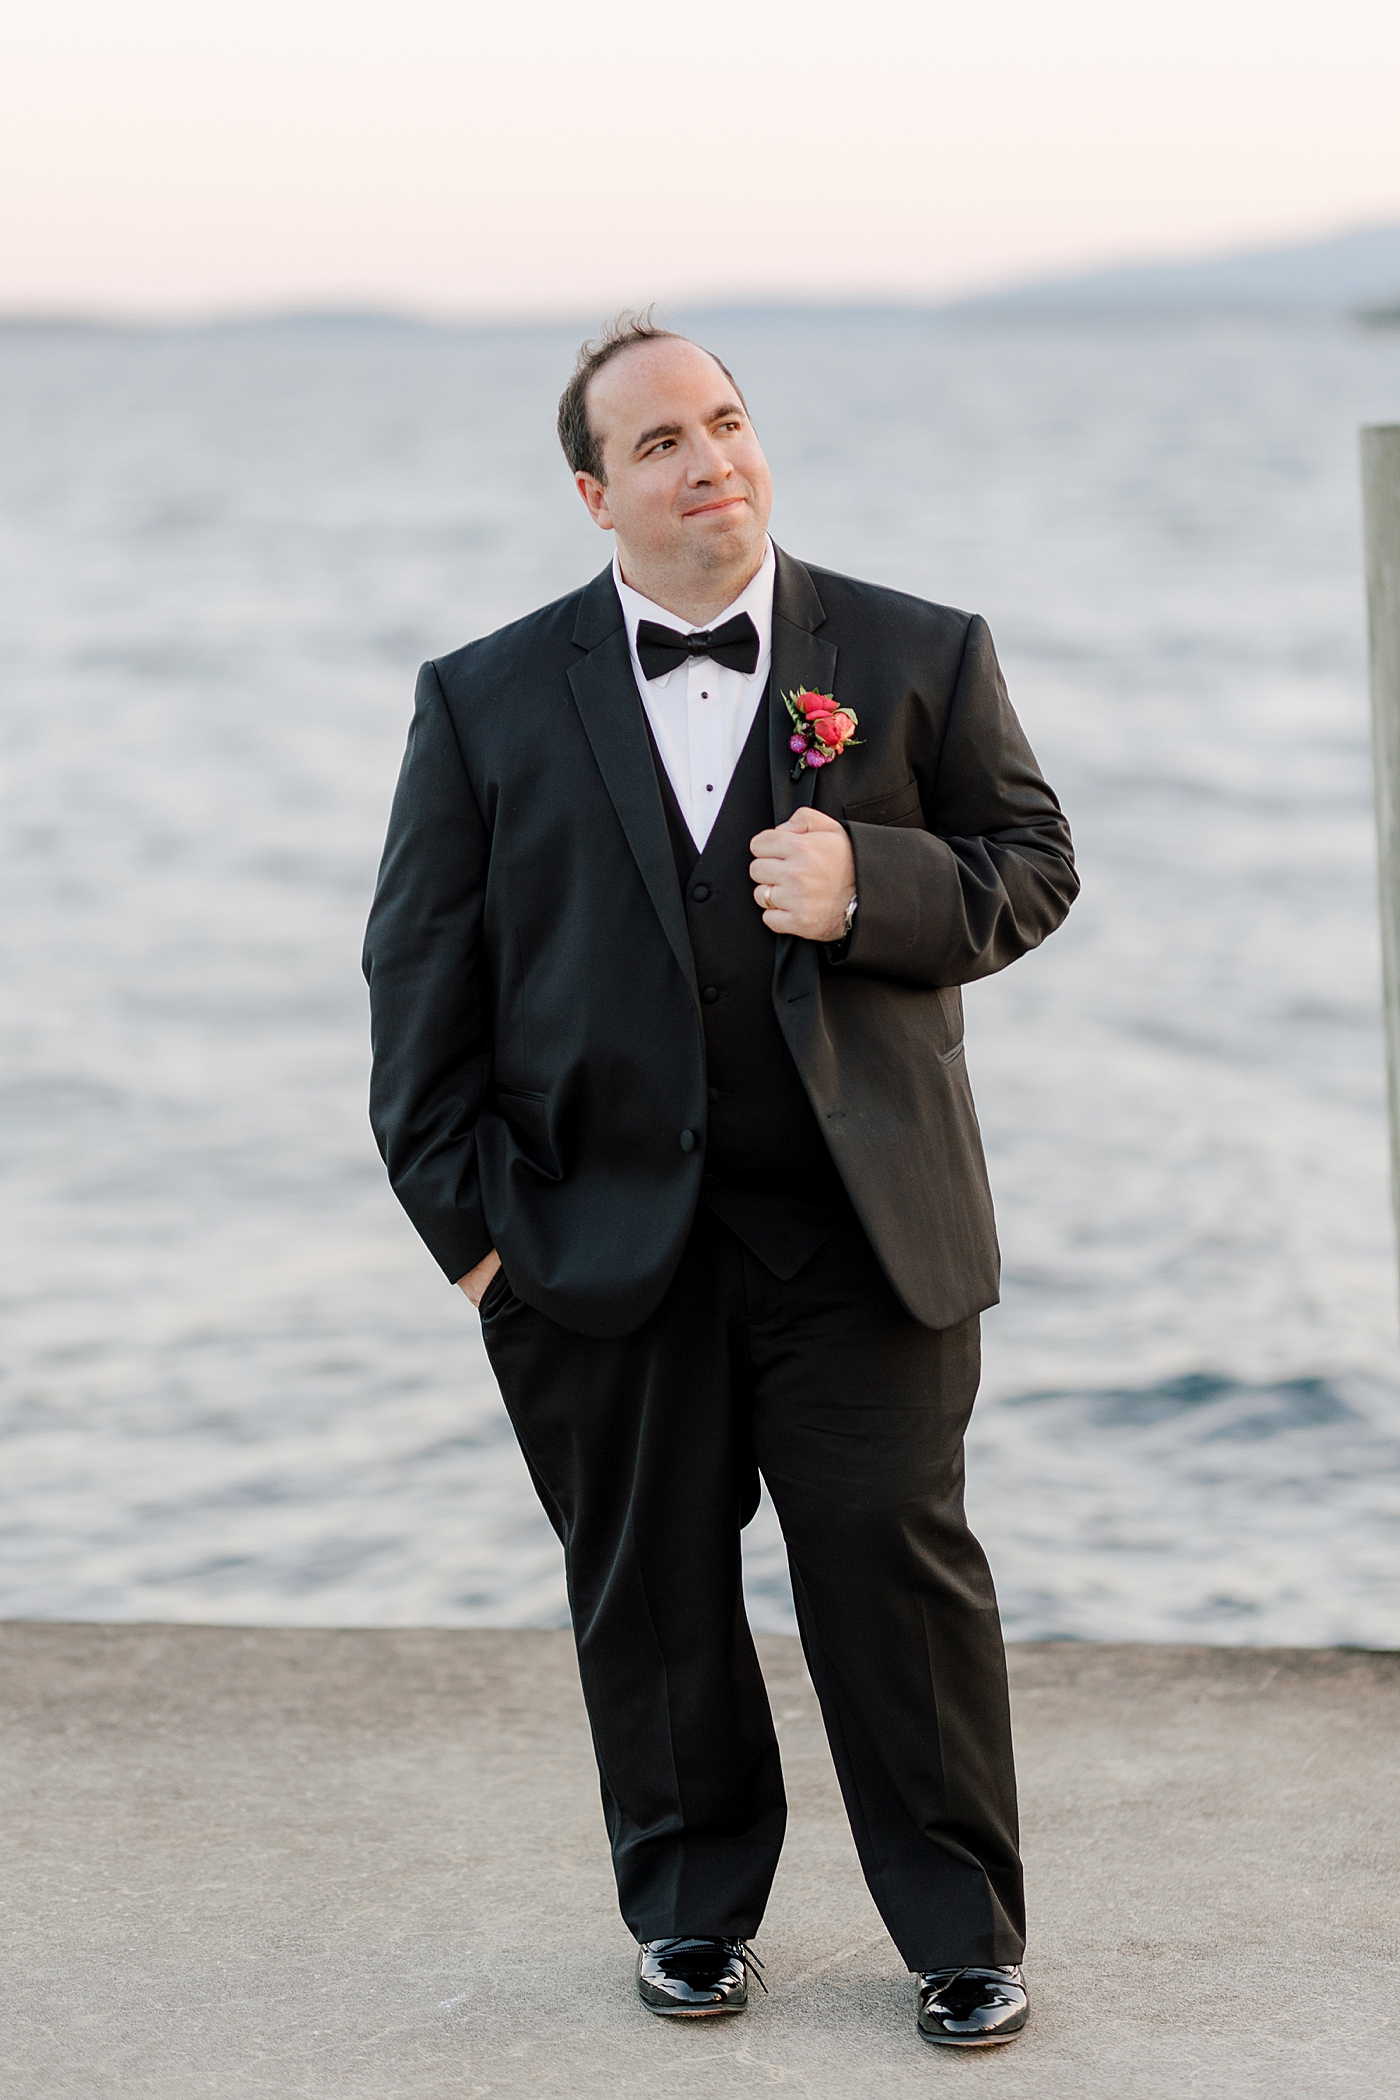 Groom posing, smiling on a dock at sunset during Sagamore Wedding | Image by Hope Helmuth Photography